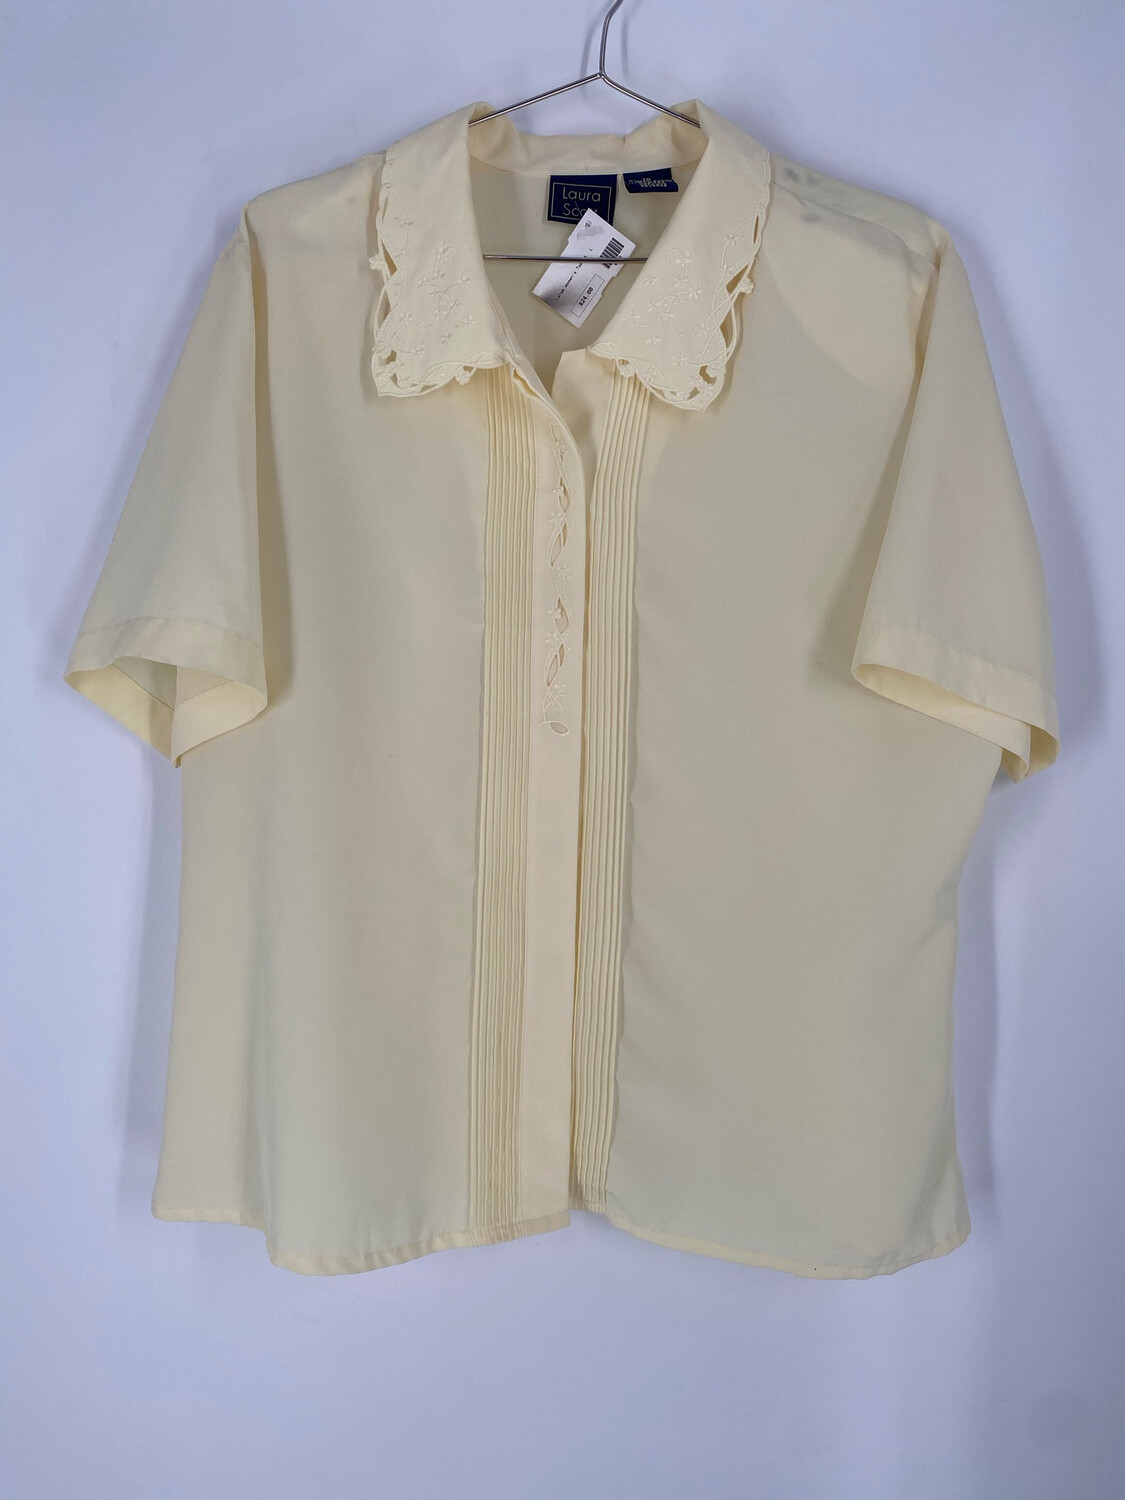 Laura Scott Light Yellow Embroidered Button Up Top Size 18